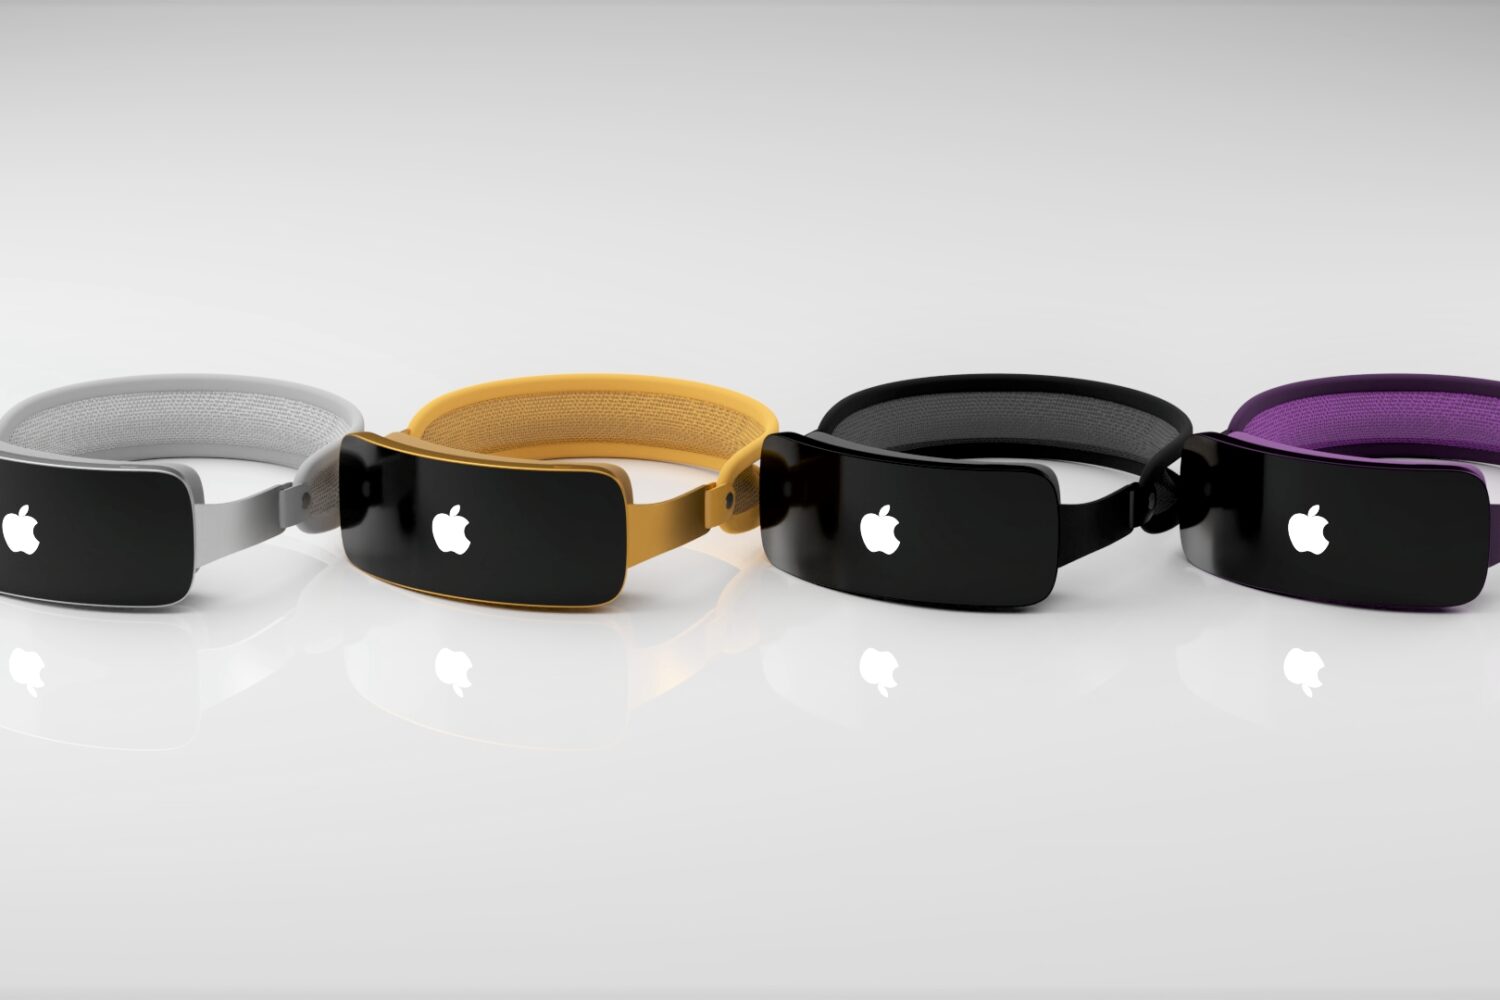 Rendering imagining Apple's Reality Pro headset in four colors